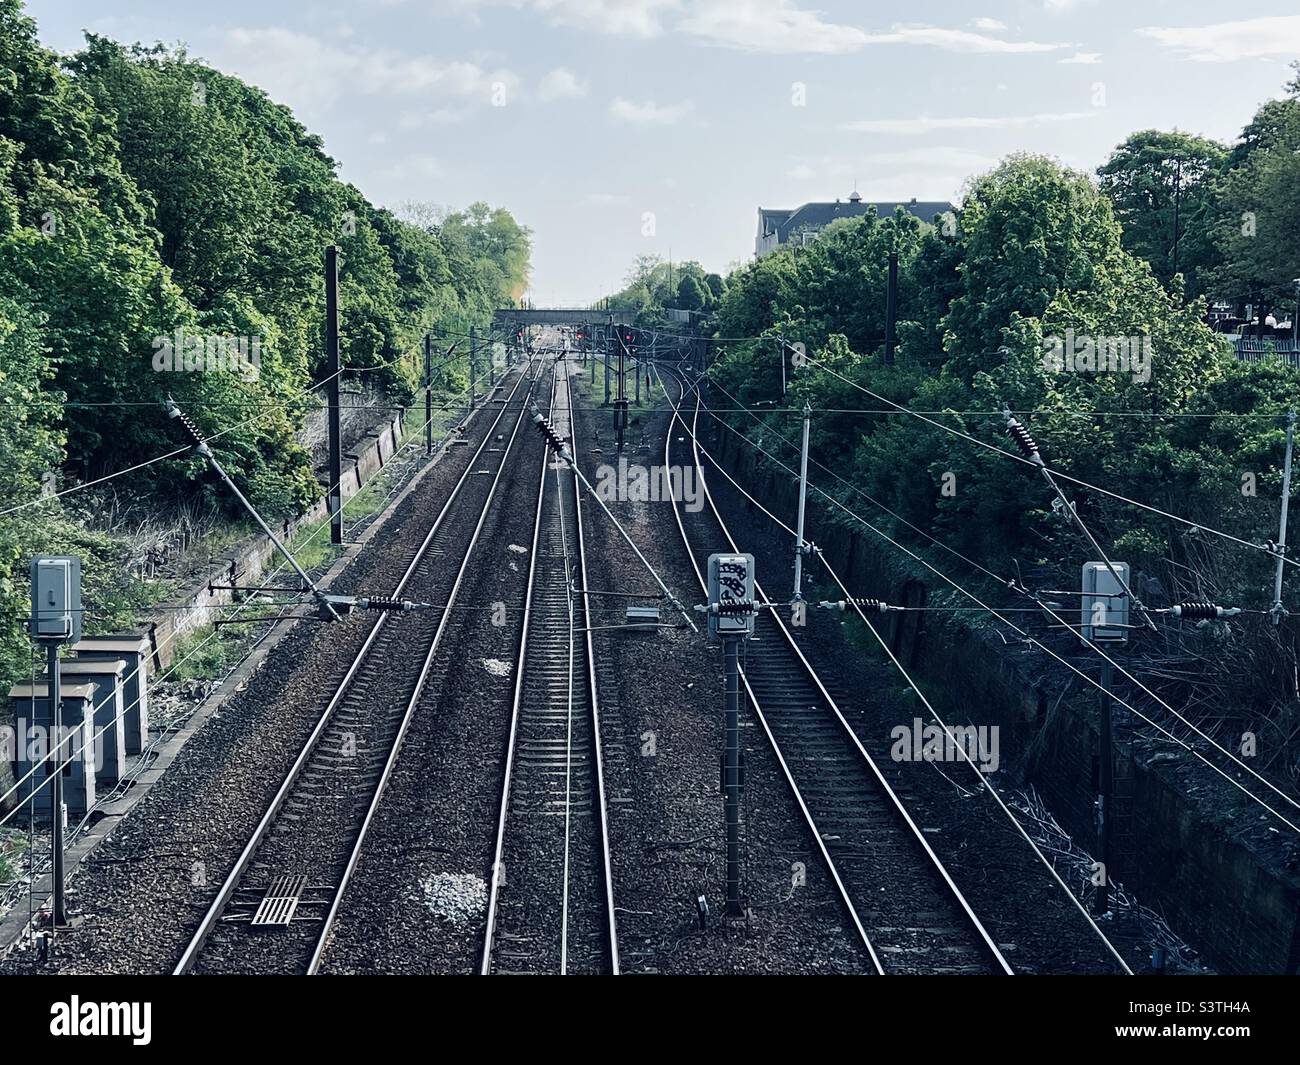 Electrified railway lines and tracks Stock Photo